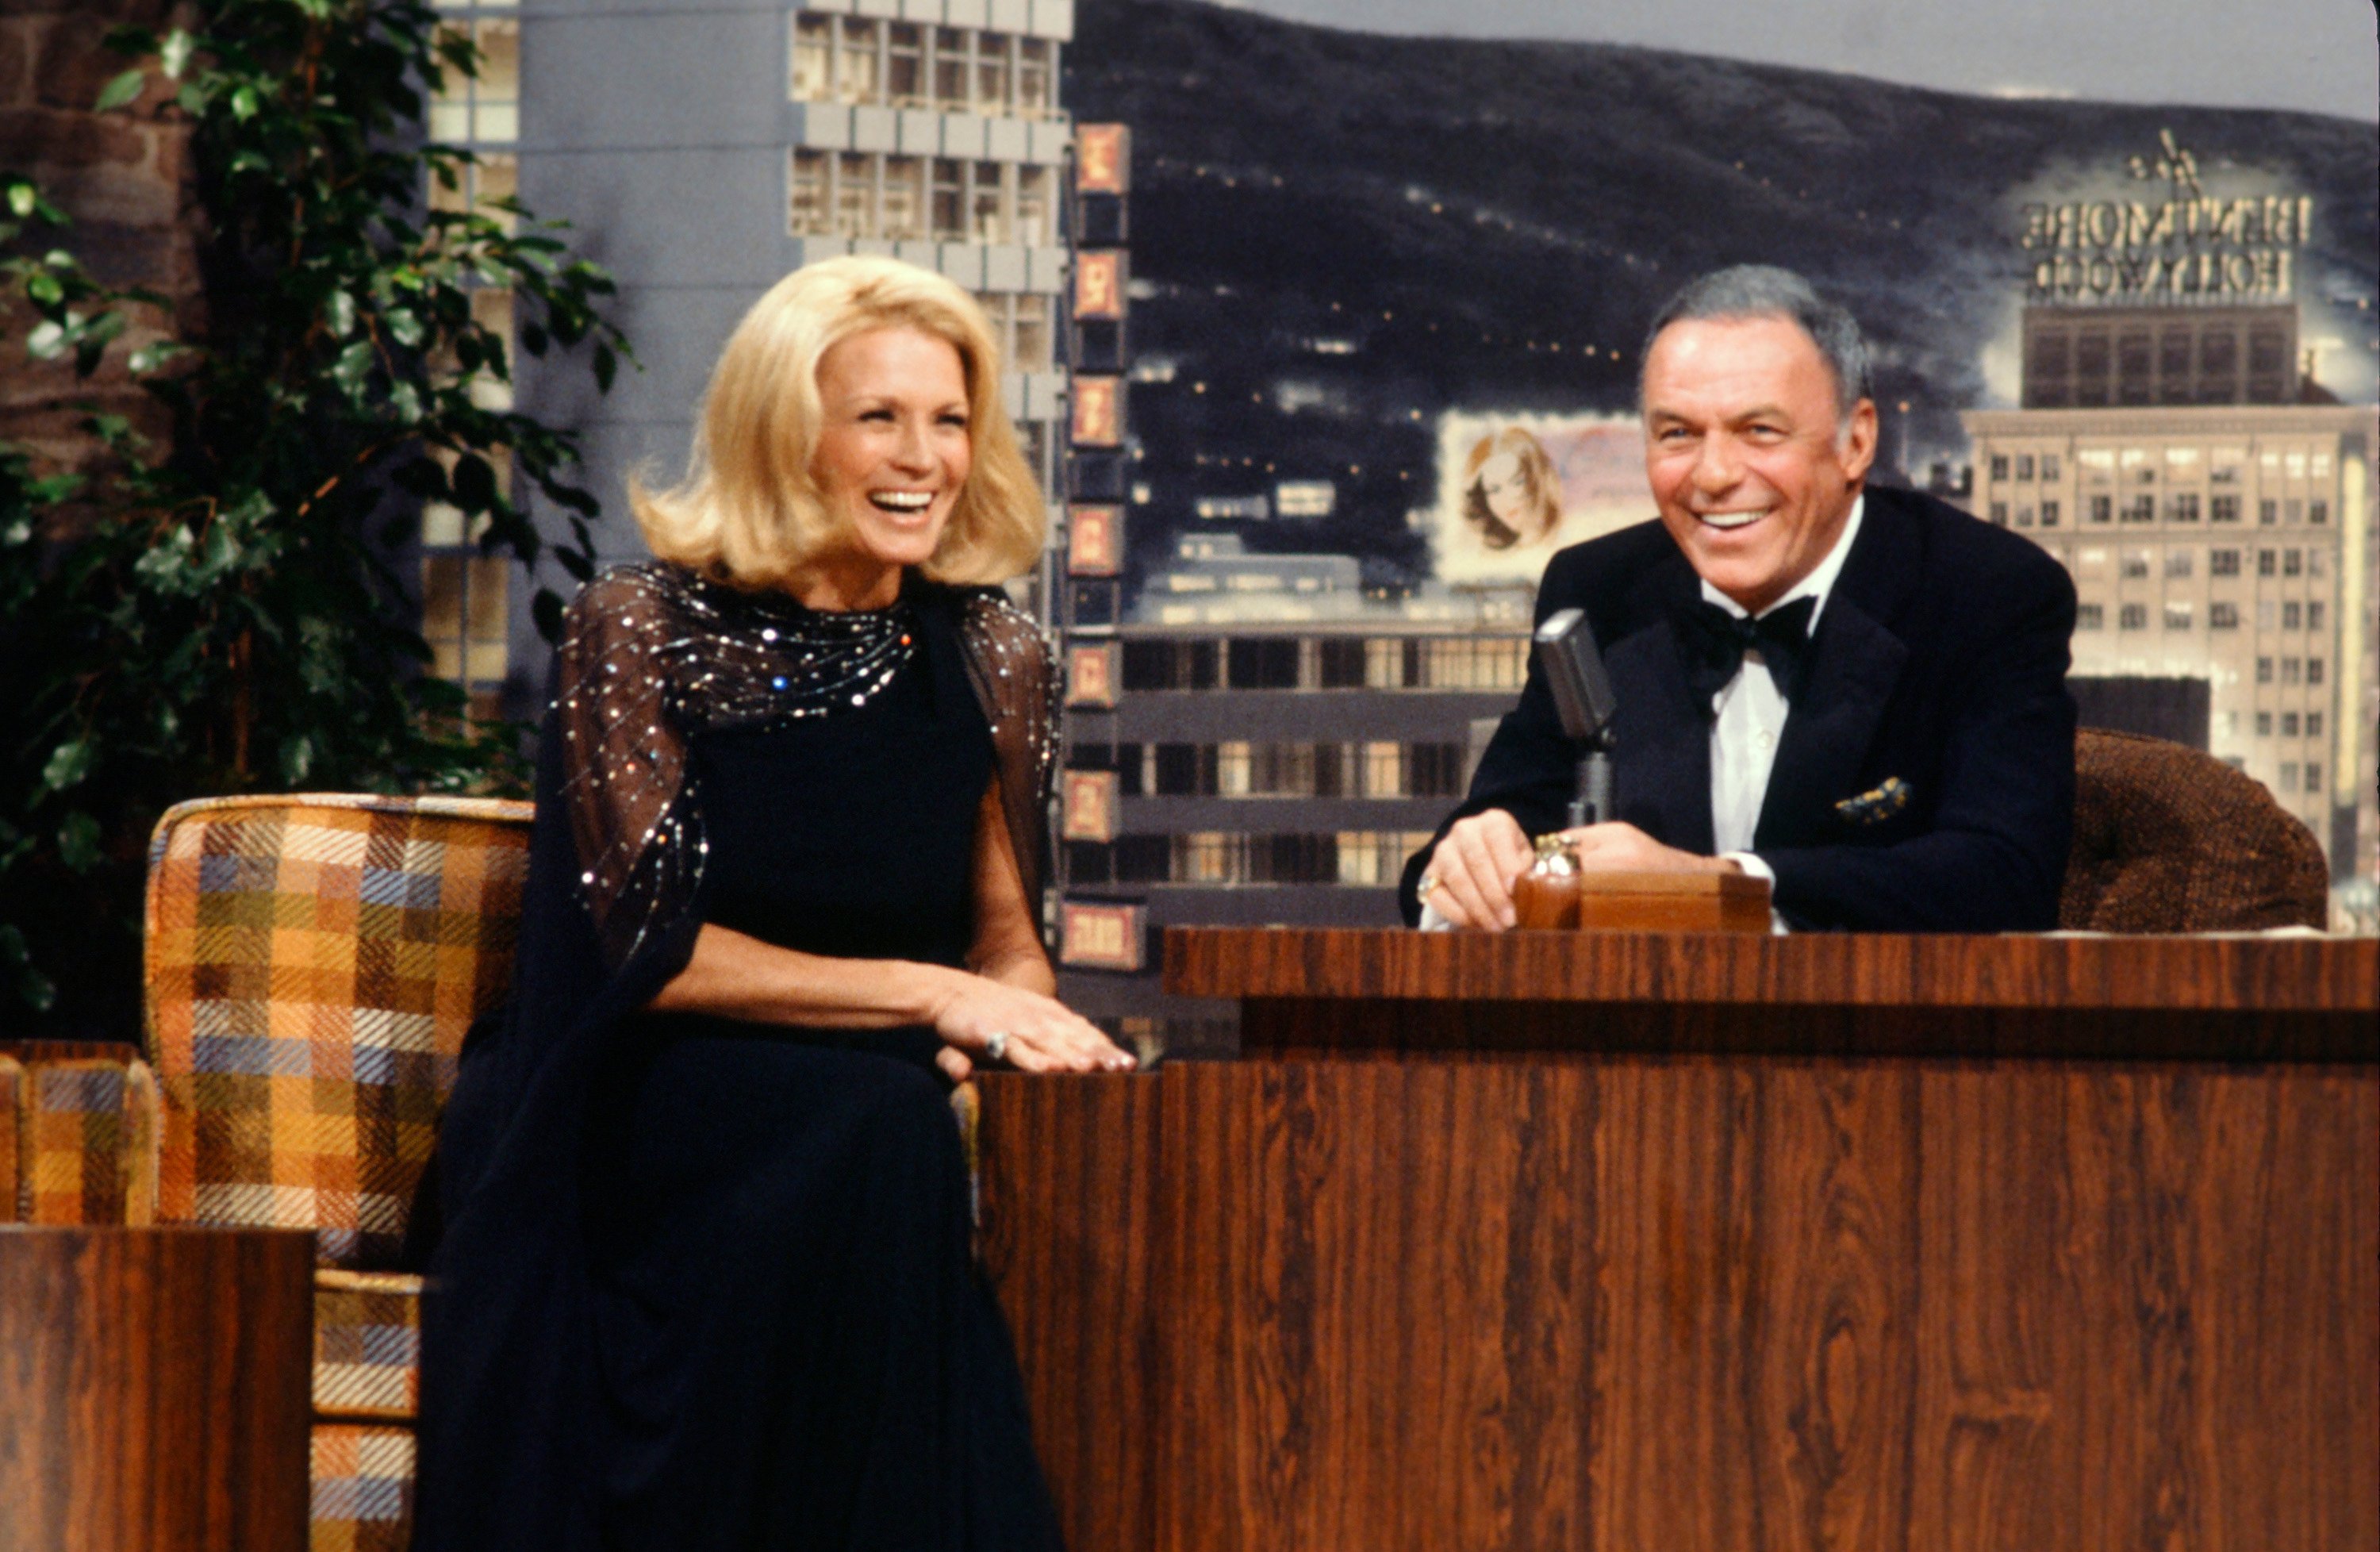 Angie Dickinson sits in a plaid arm chair and Frank Sinatra sits behind 'The Tonight Show' desk as a guest host.